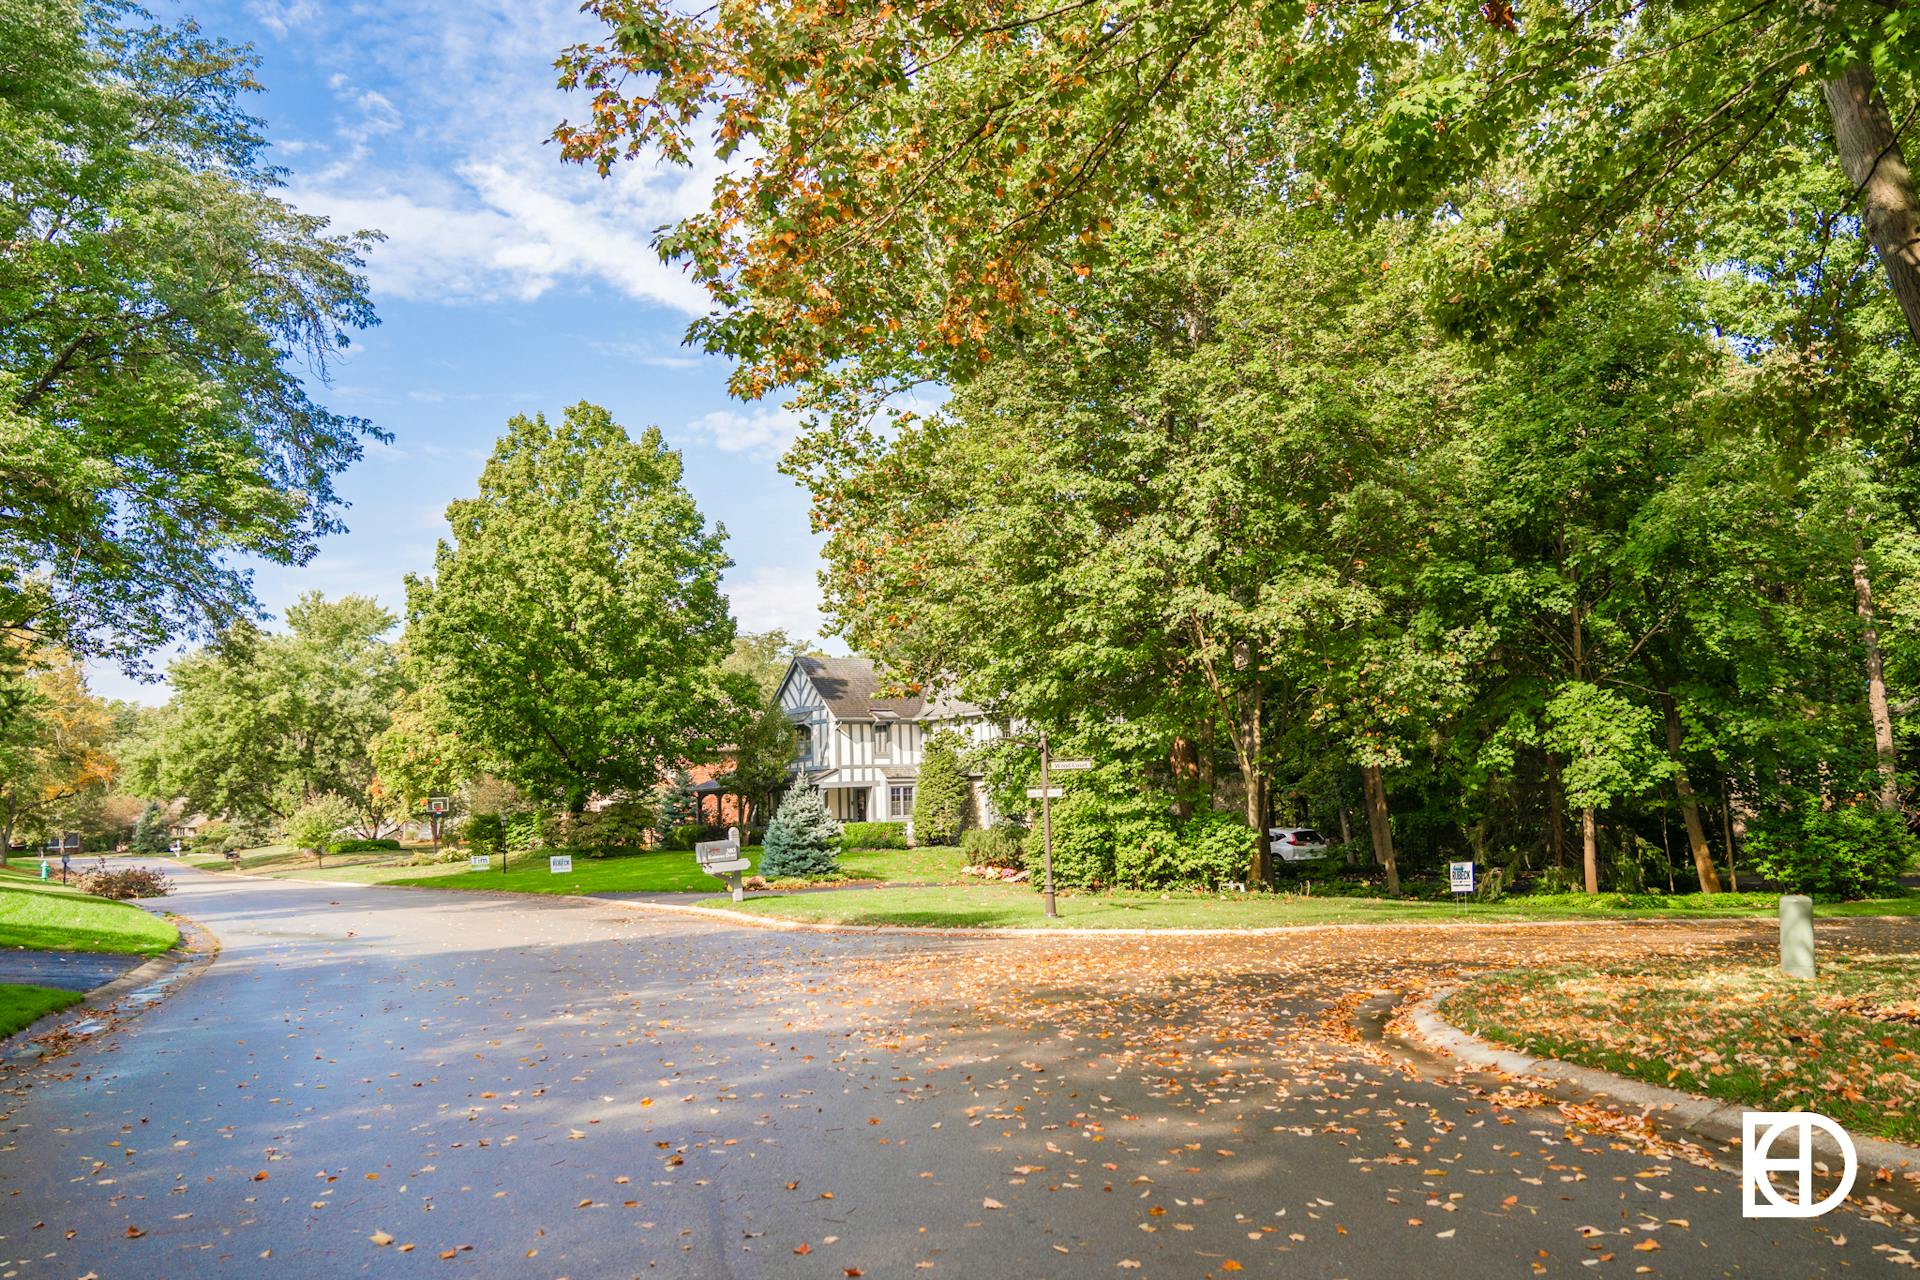 Photo of tree-lined street in Raintree Place in Zionsville, Indiana.